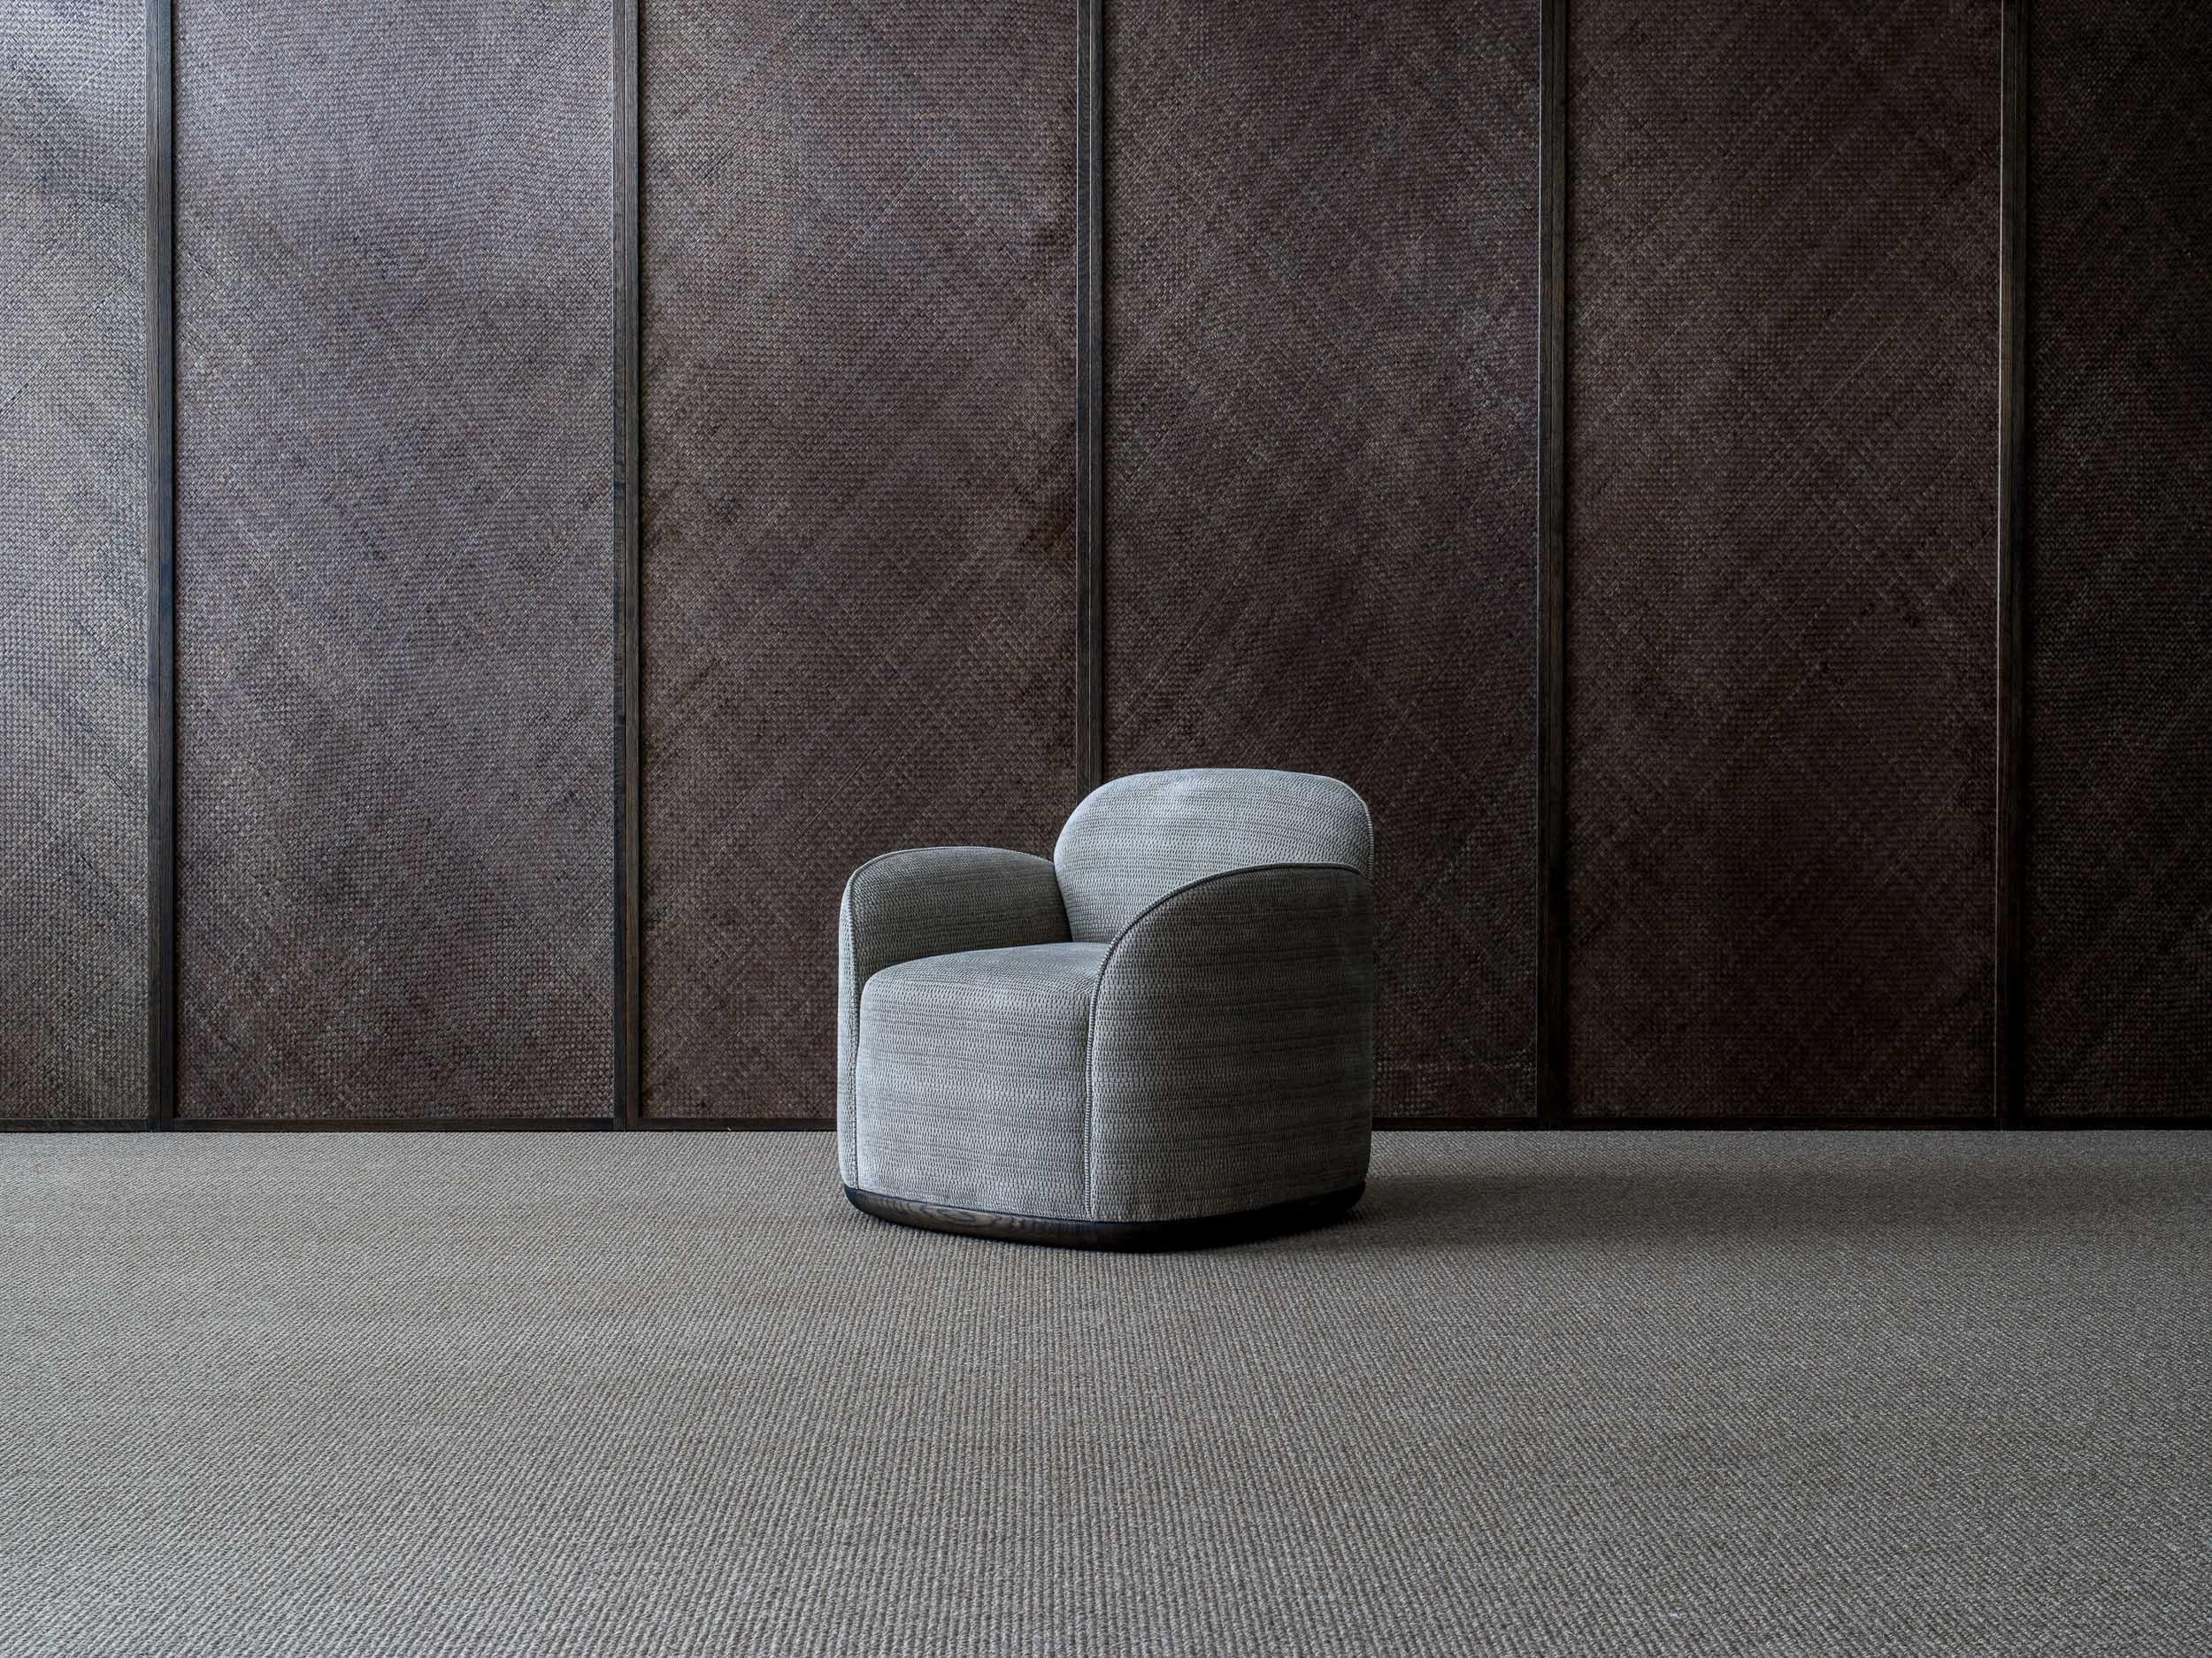 Unio armchair by Poiat 
Designers: Timo Mikkonen & Antti Rouhunkoski 

Collection UNIO 2021

Dimensions: H. 72 x W. 75 D. 72 SH. 40
Model shown: Cat 4. Pergamena 017 - Dedar
 
The Unio Collection, featuring an armchair and sofas, opens a new